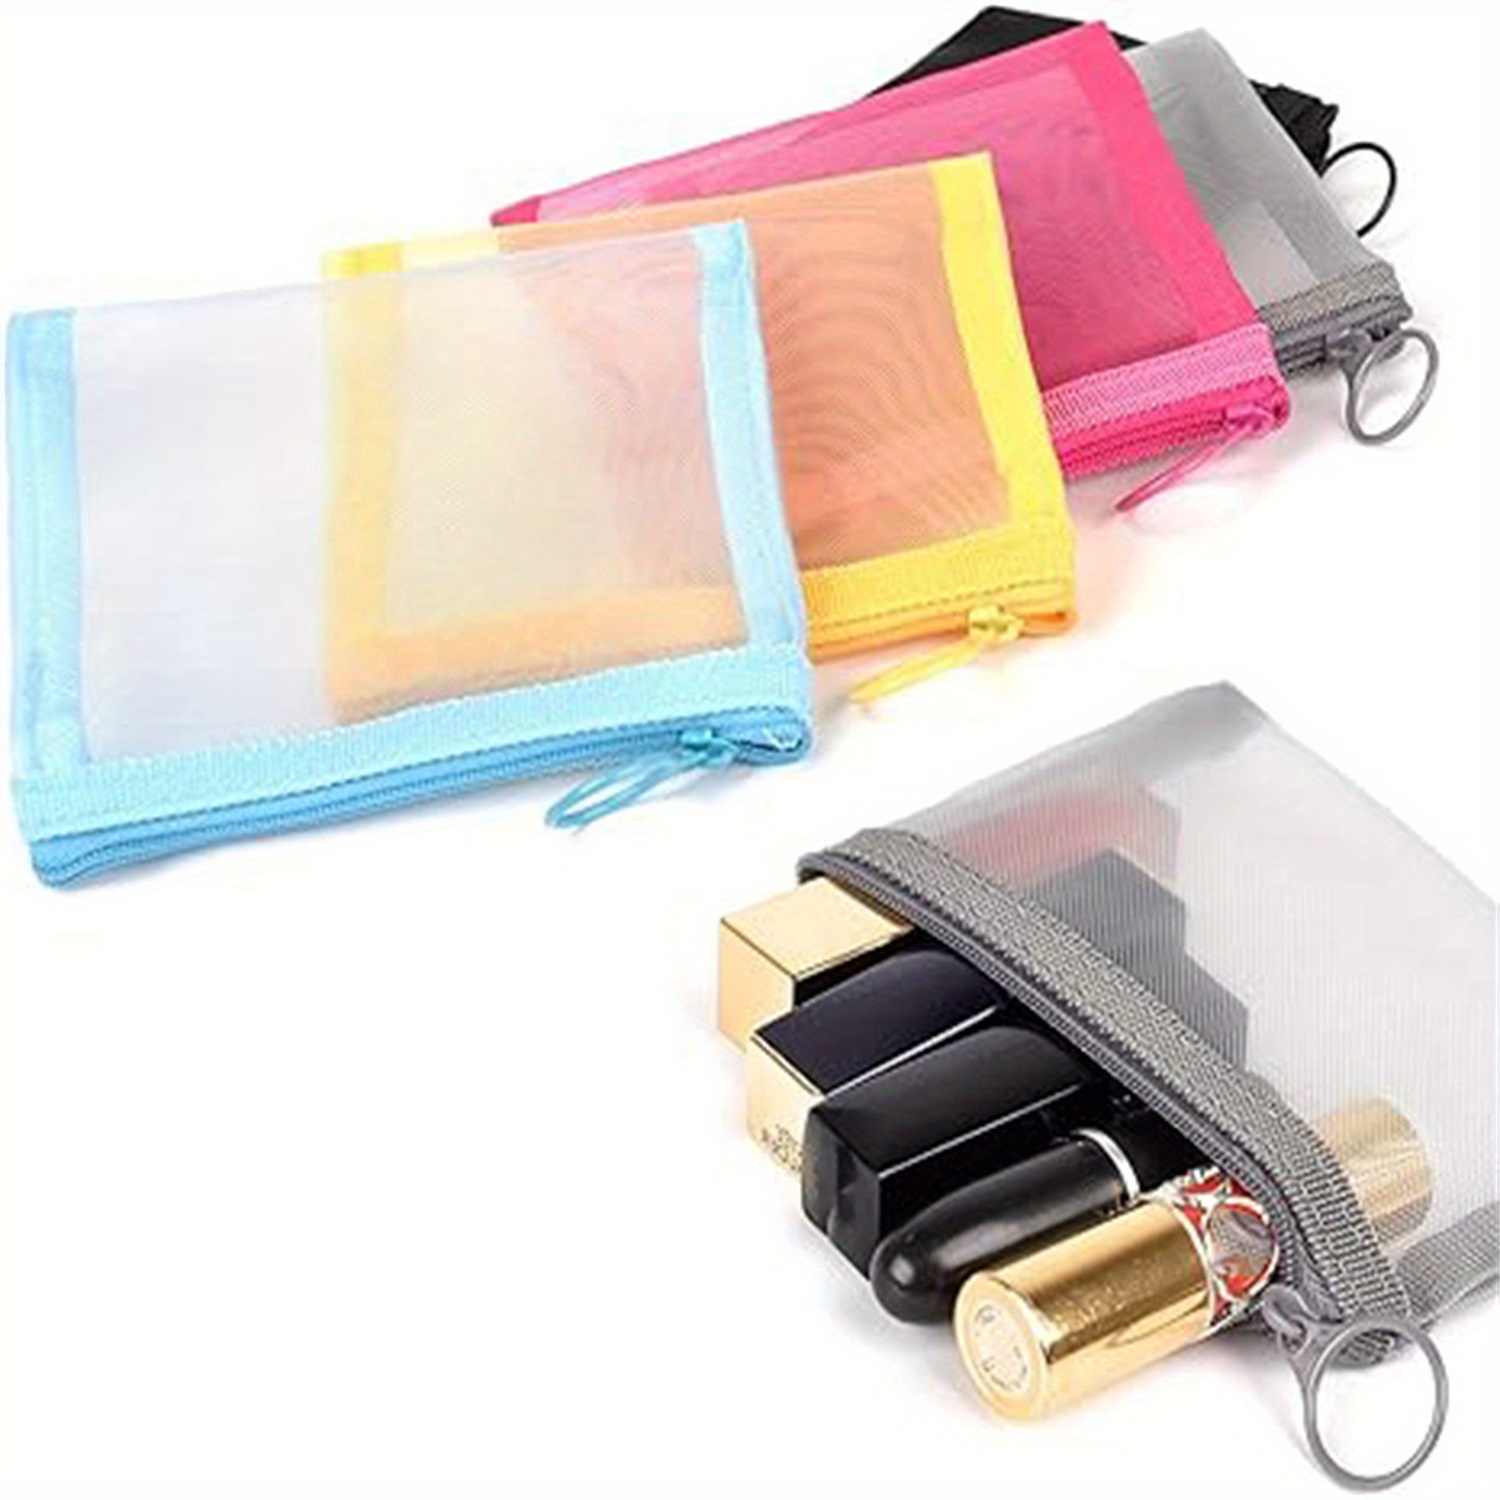 

5pcs Mini Zipper Mesh Bags, 4" X 5", Beauty Makeup Lipstick Cosmetic Accessories Organizer, Small Travel Kit Storage Pouch, Assorted Colors